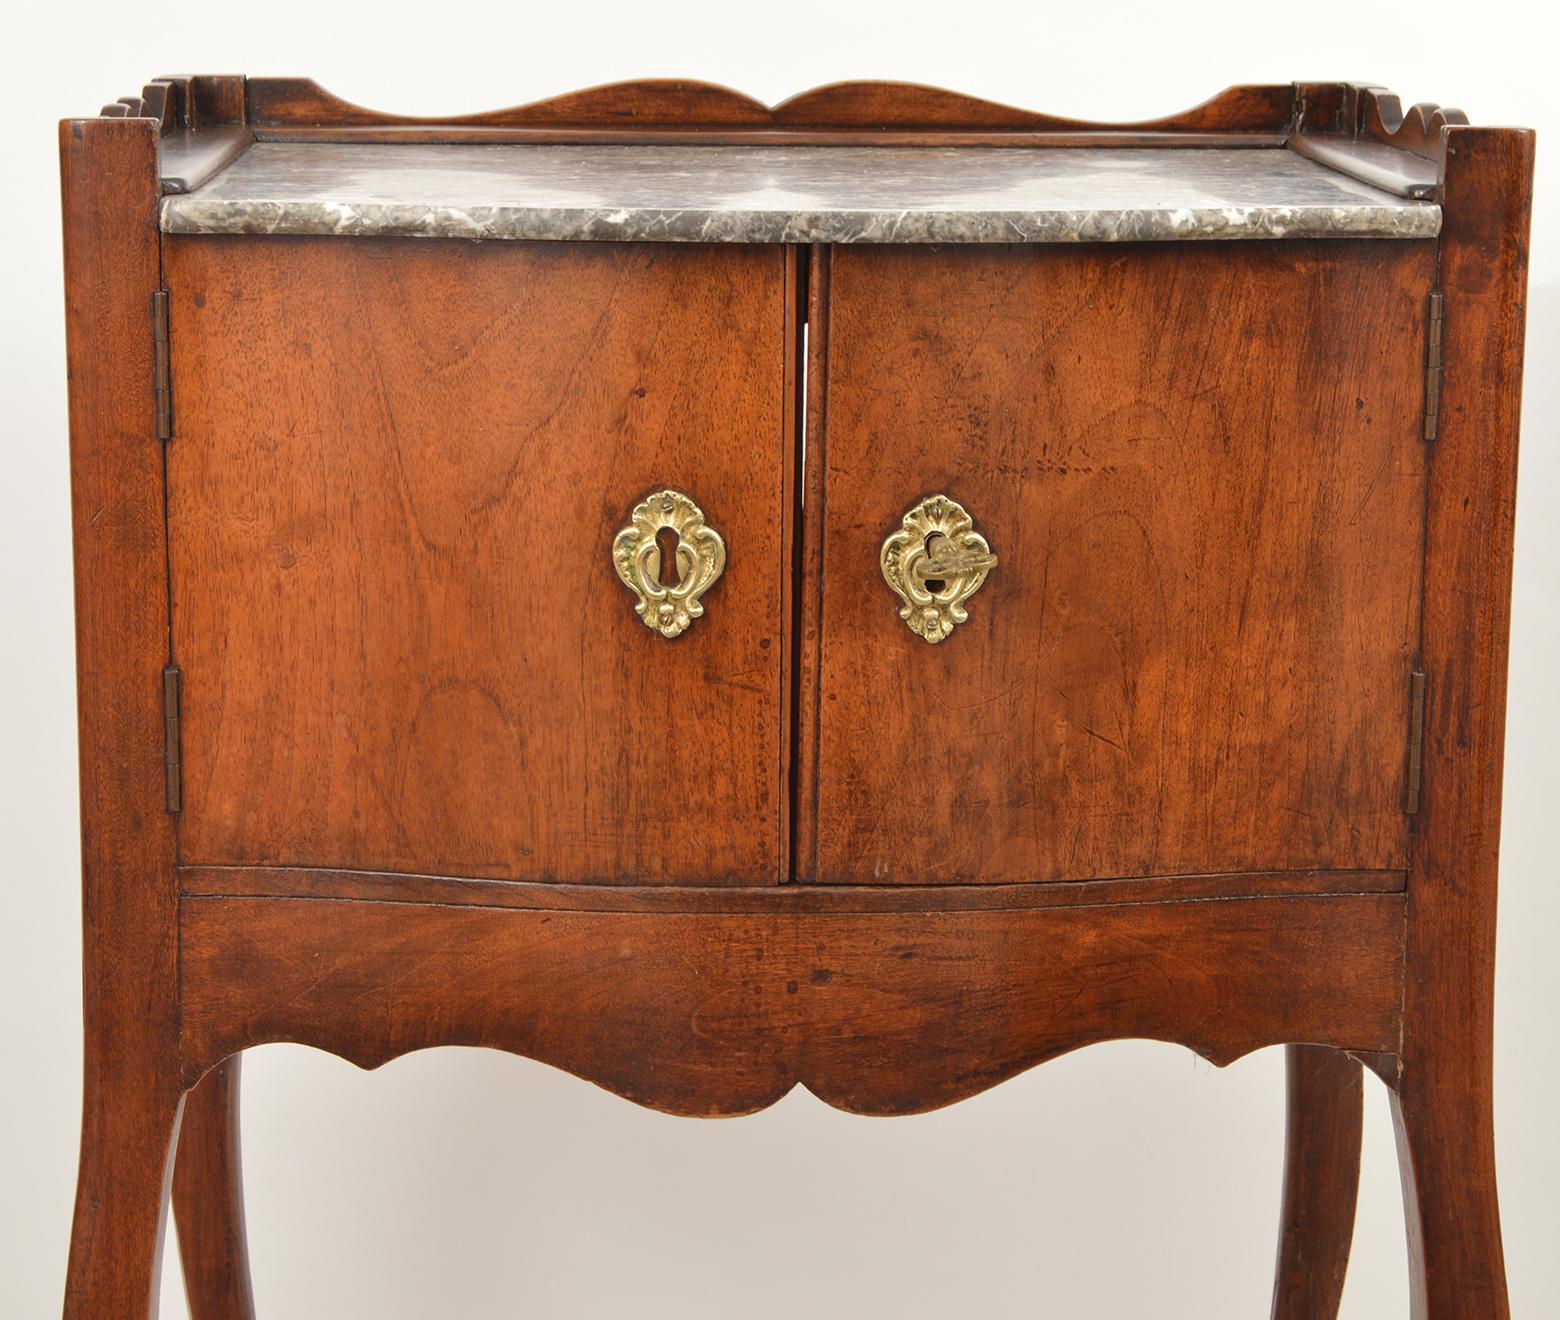 This charming French provincial marble top commode features a carved top edge enclosing the marble top, two doors, a shaped apron and four finely shaped cabriole legs. Both sides have shaped cut outs for lifting.